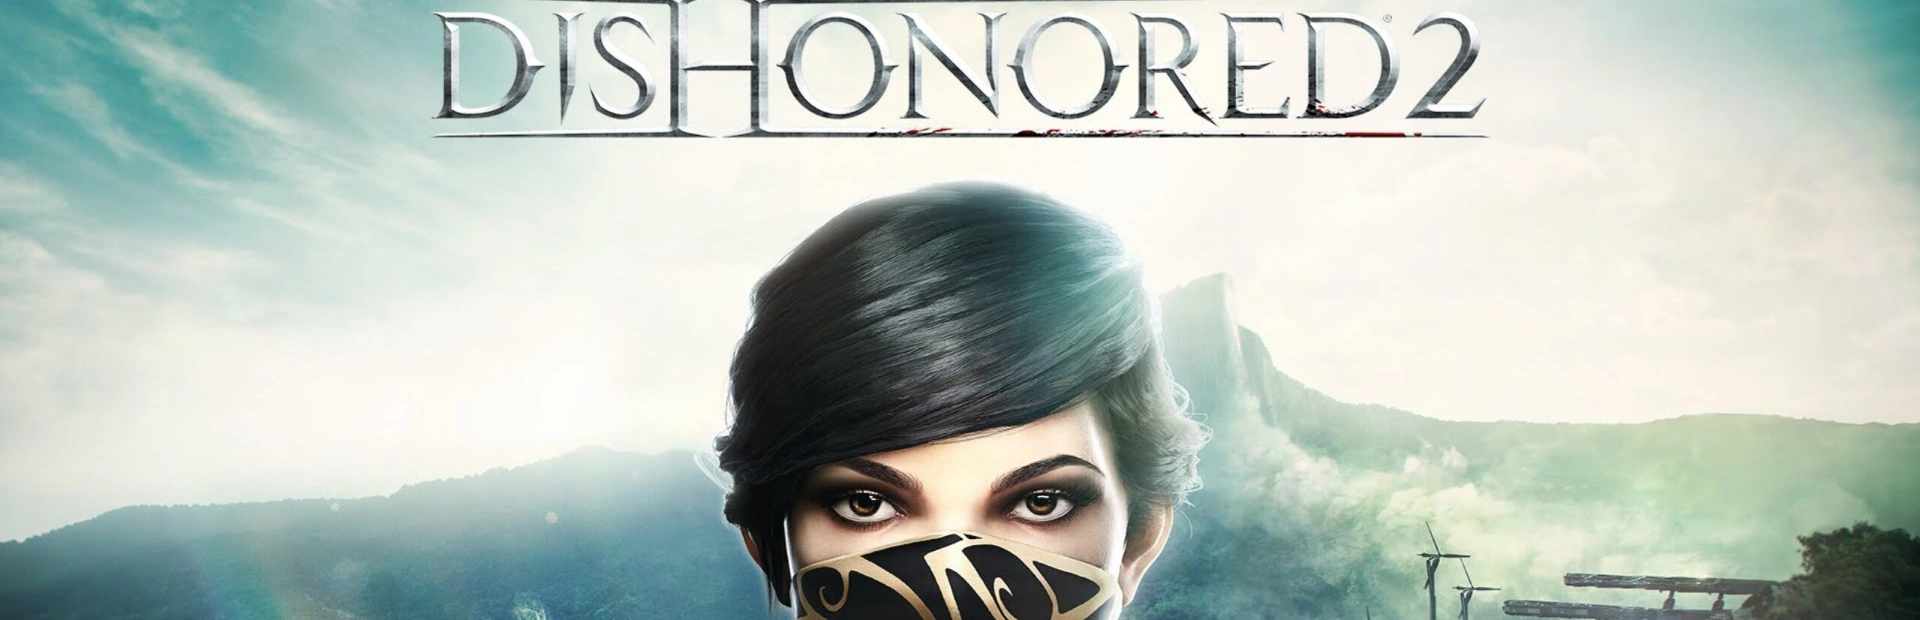 Dishonored.2.banner1